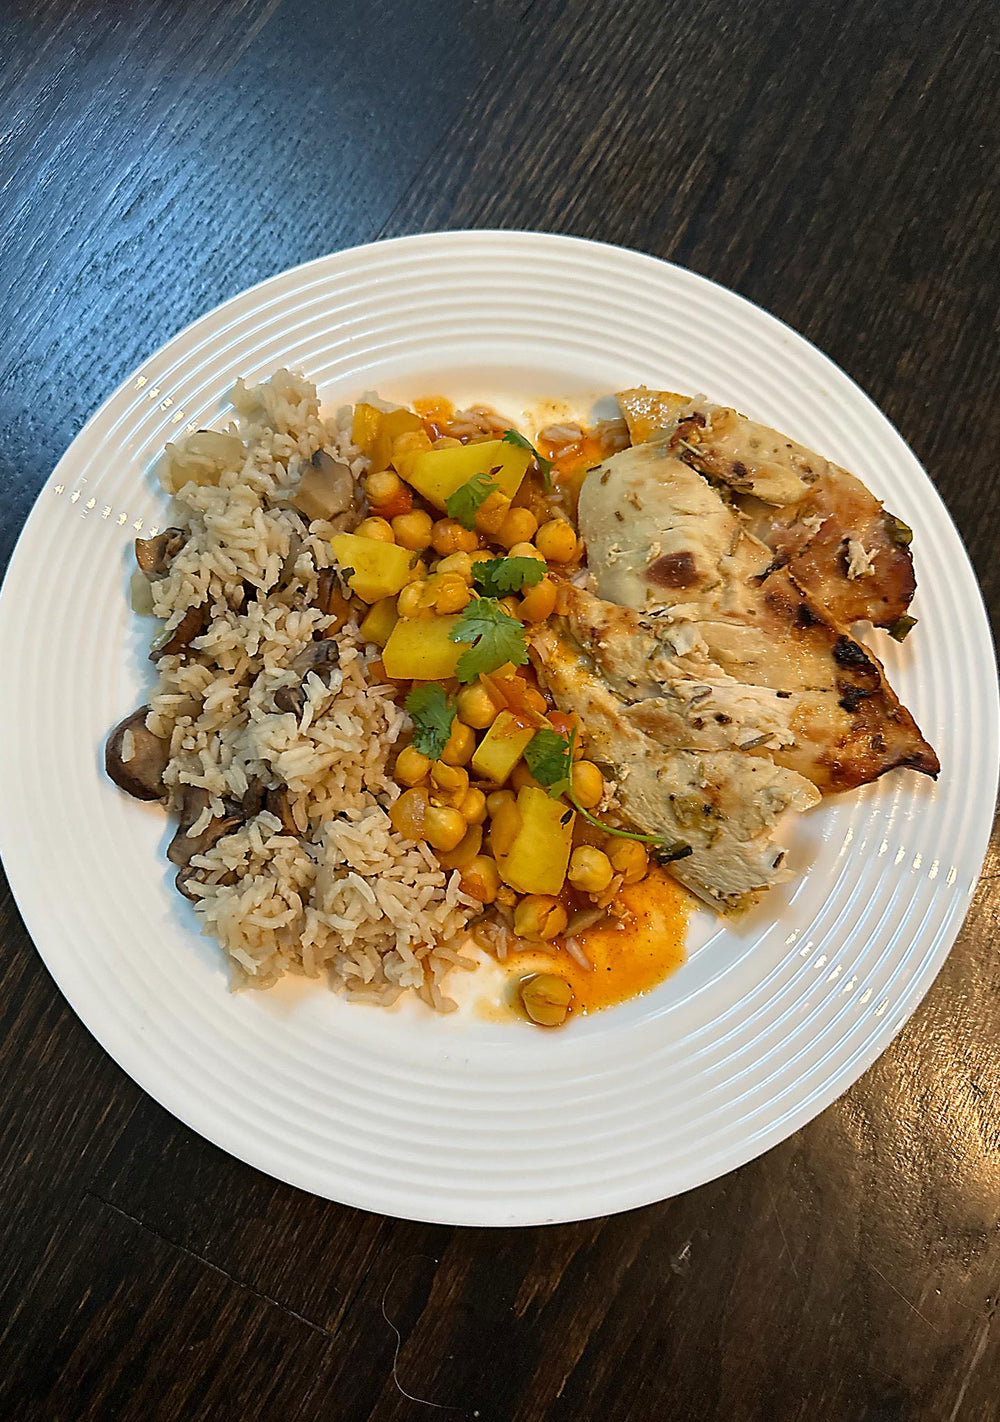 Sarah paired Simply Masala Chana Masala, Chickpeas in gravy with Grilled Chicken